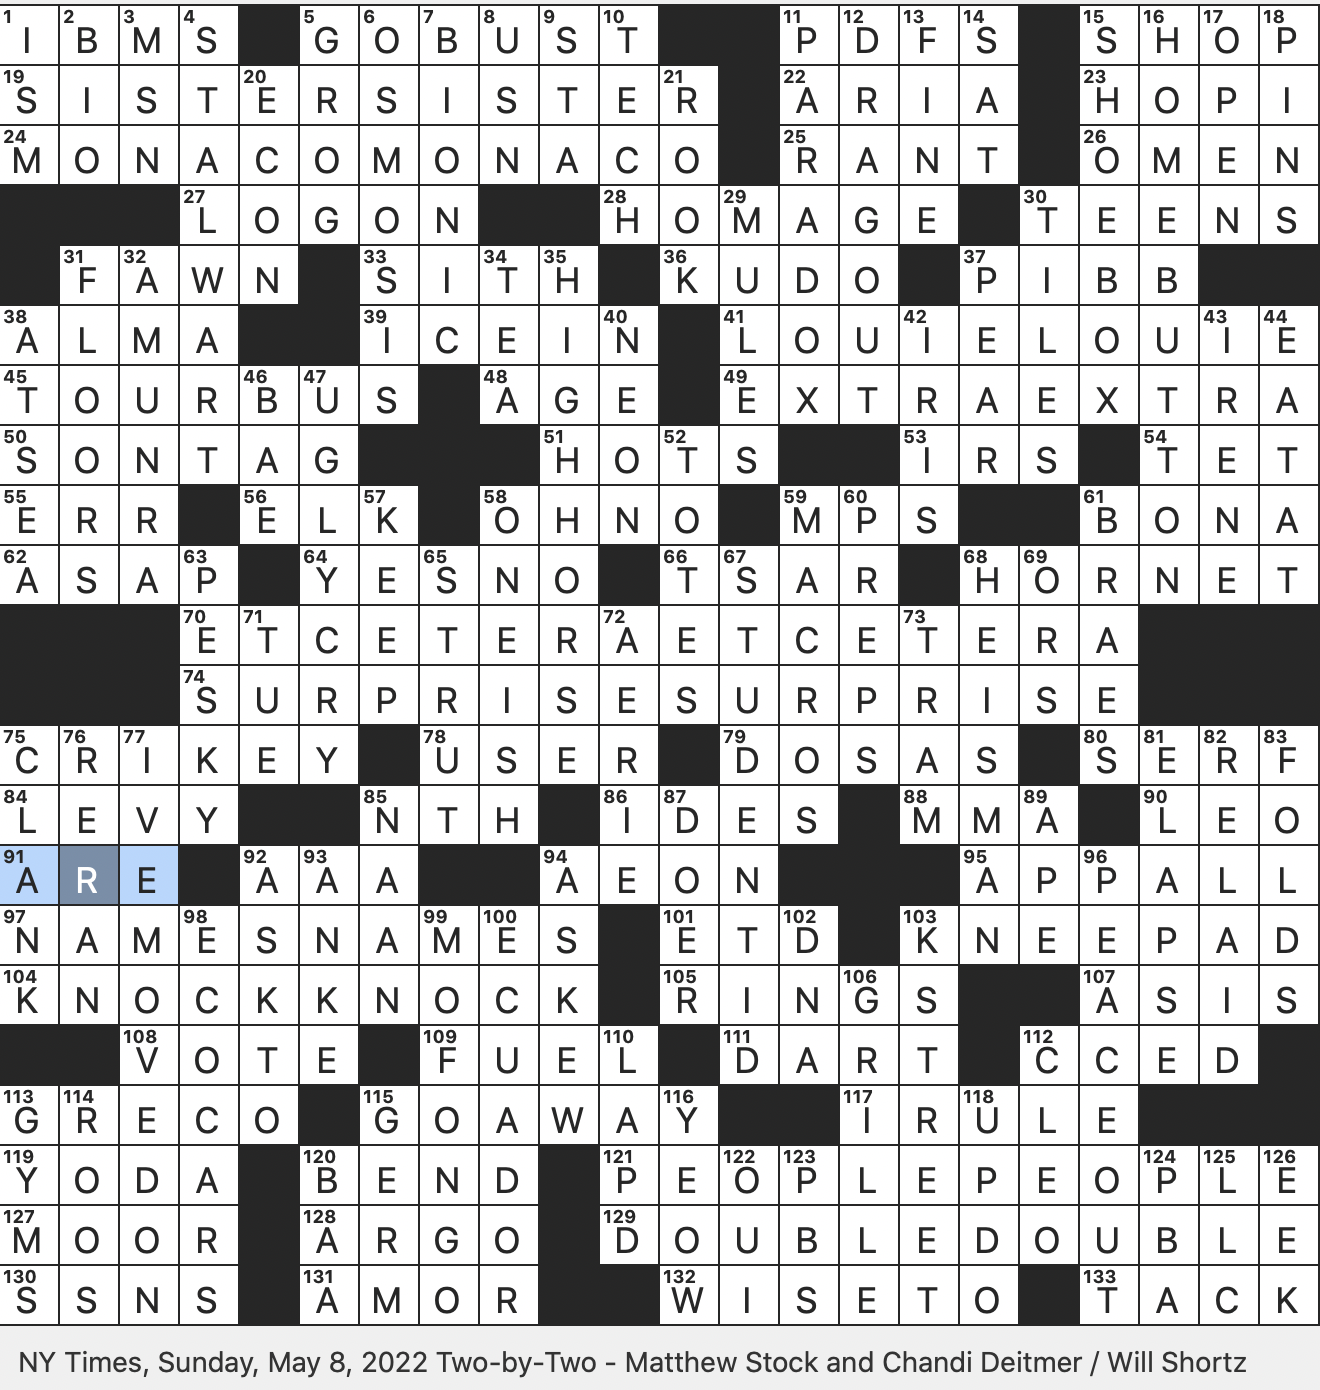 Rex Parker Does the NYT Crossword Puzzle: Fried plantain dish of Puerto  Rico / SUN 5-8-22 / 1990s sitcom starring Tia and Tamera Mowry / Shortcut  missing from newer smartphones / Weep